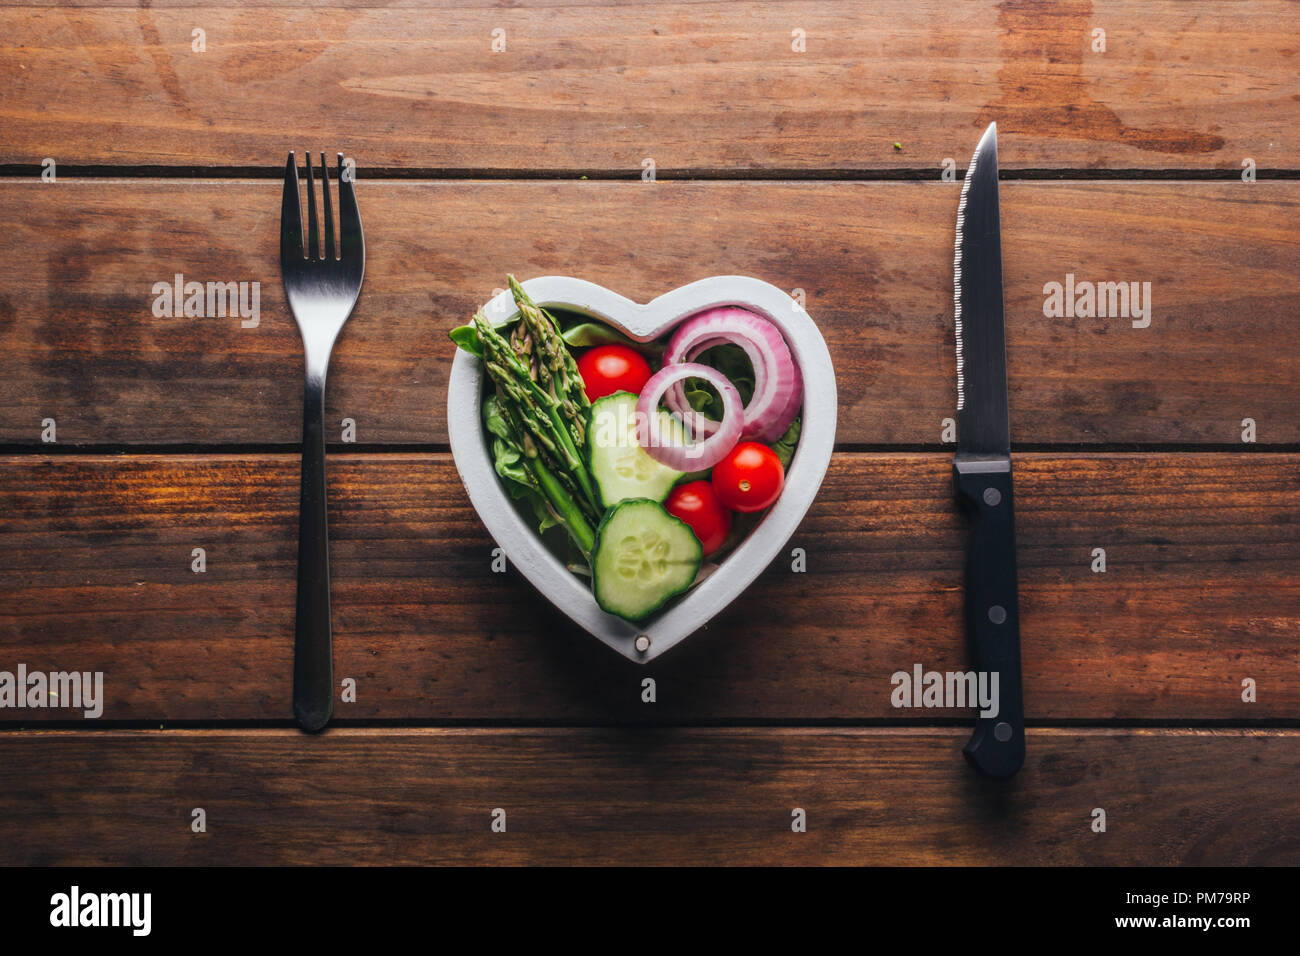 Top view of a wooden table with a plate of heart-shaped salad and its cutlery, concept of love for food Stock Photo